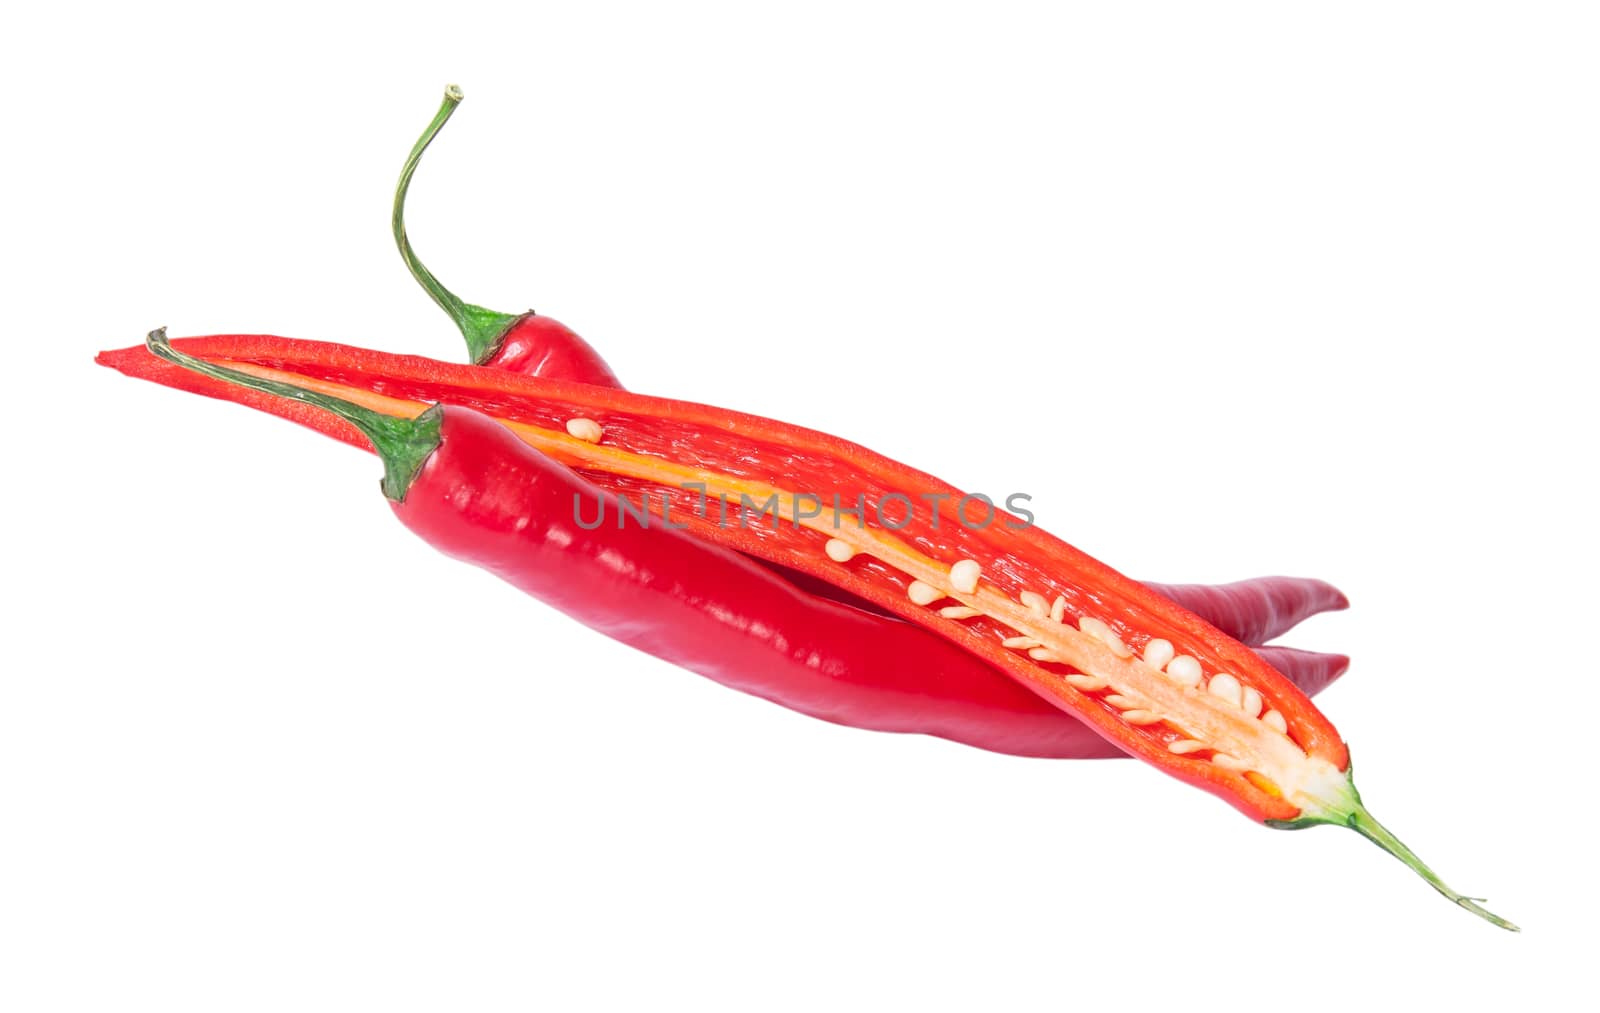 Two whole and one half red chili peppers deployed by Cipariss